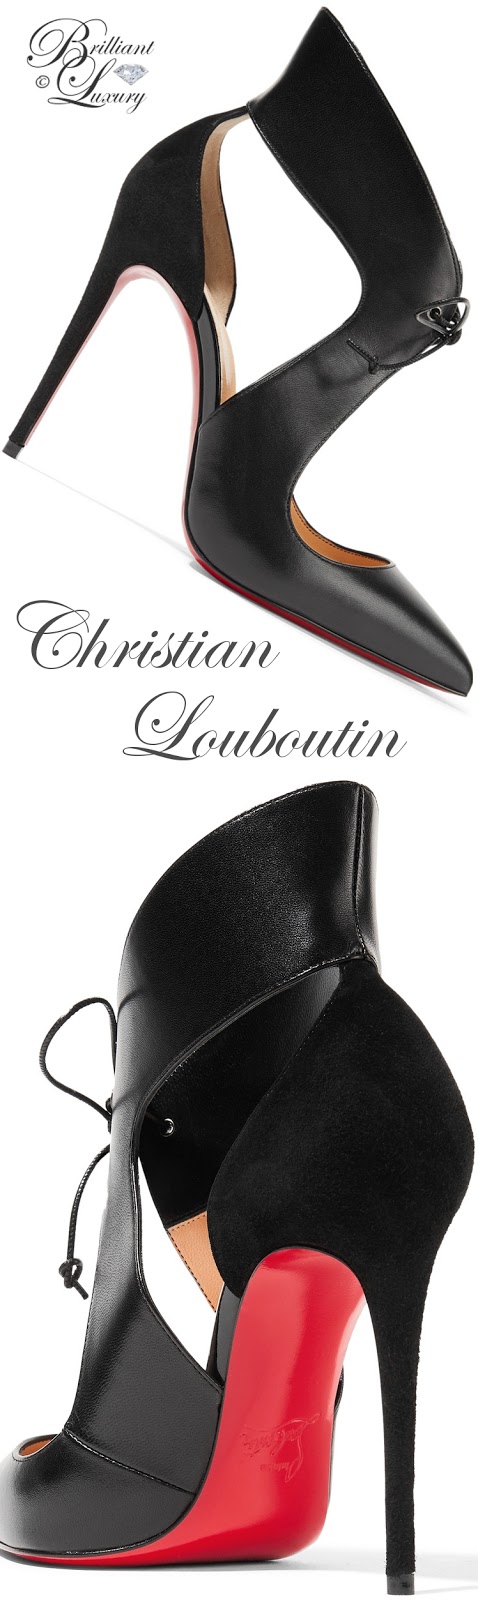 Brilliant Luxury: ♦black & red shoes